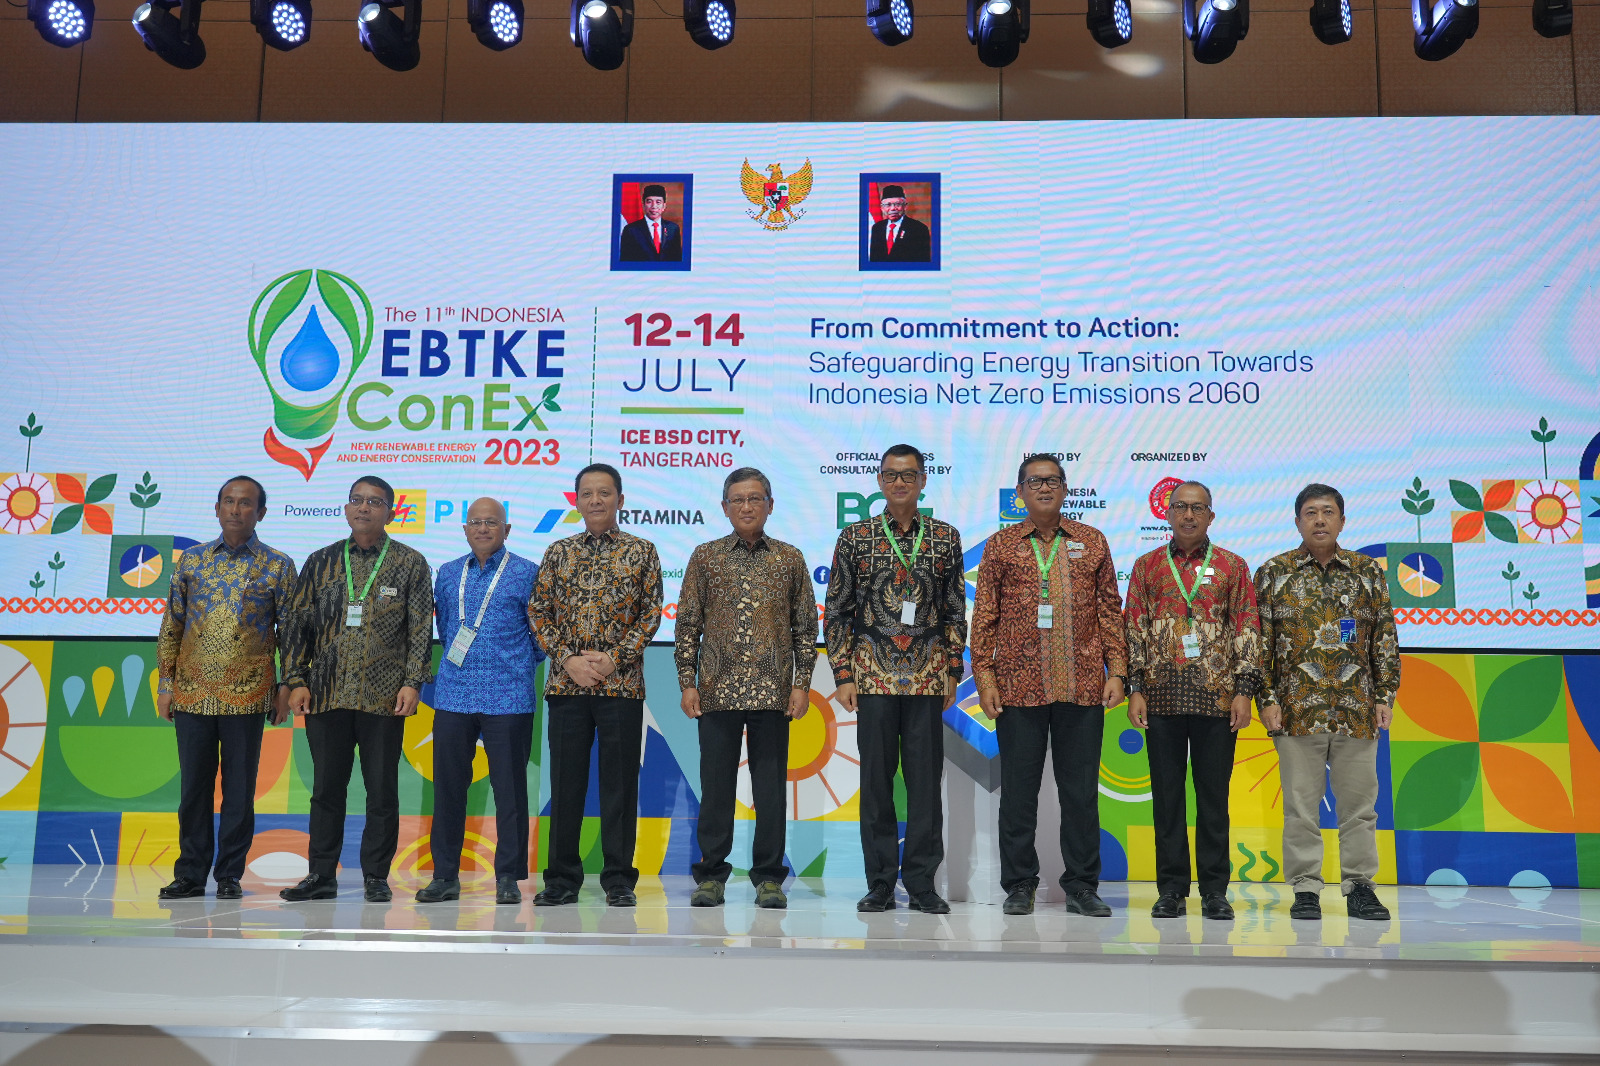 opening ceremony The 11th Indonesia EBTKE Conference and Exhibition 2023